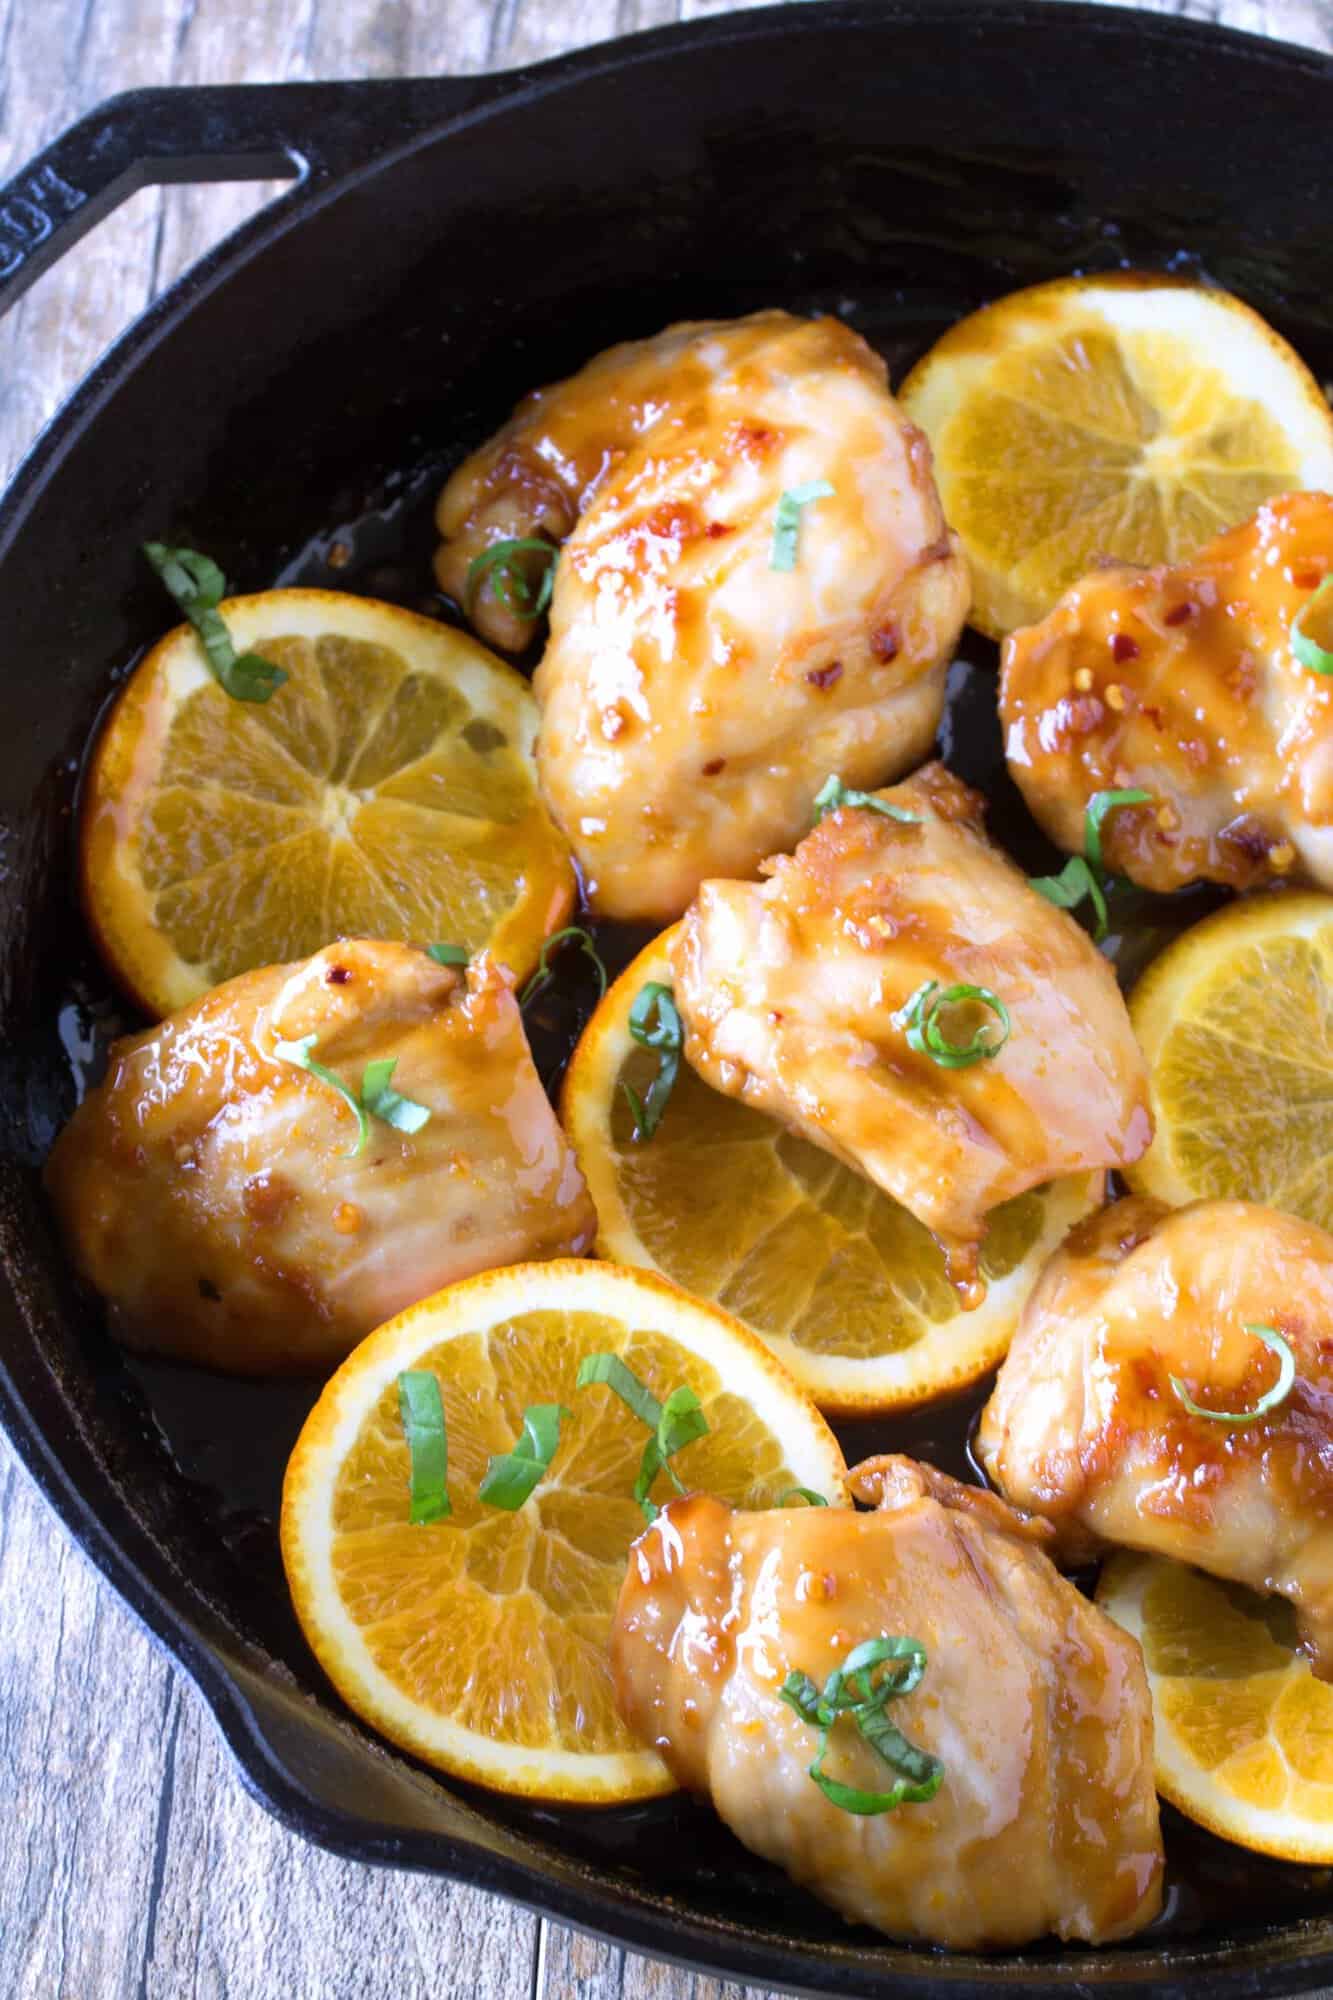 Moist and juicy chicken thighs are cooked in an Asian-inspired orange glaze in these tasty Orange Glazed Skillet Chicken Thighs.